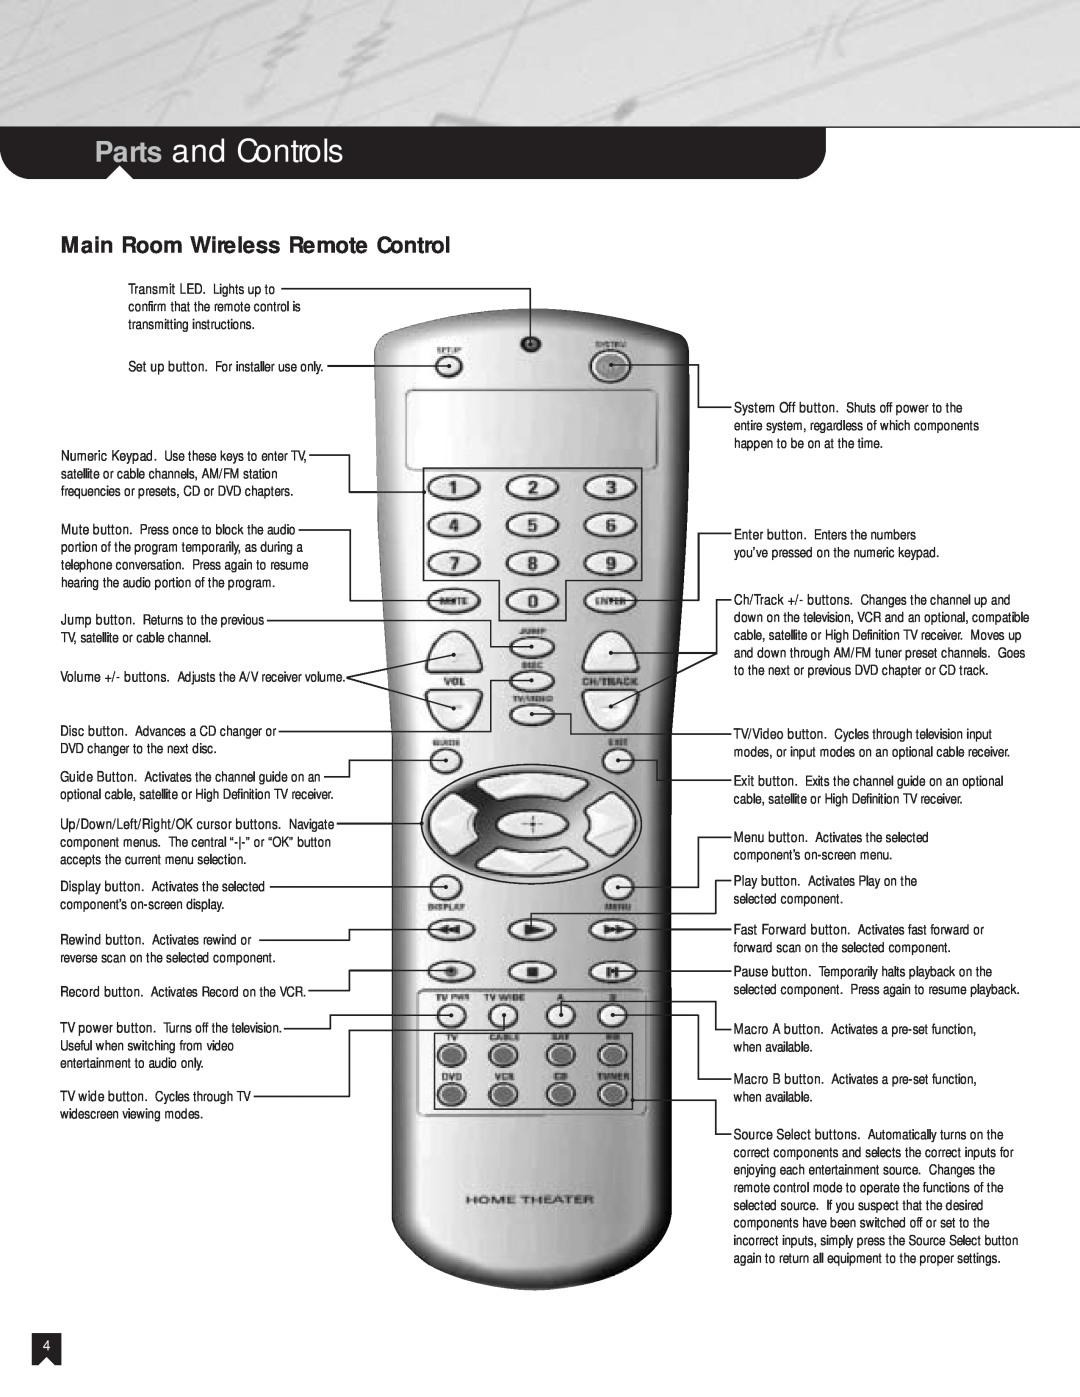 Sony NHS-502 manual Parts and Controls, Main Room Wireless Remote Control 